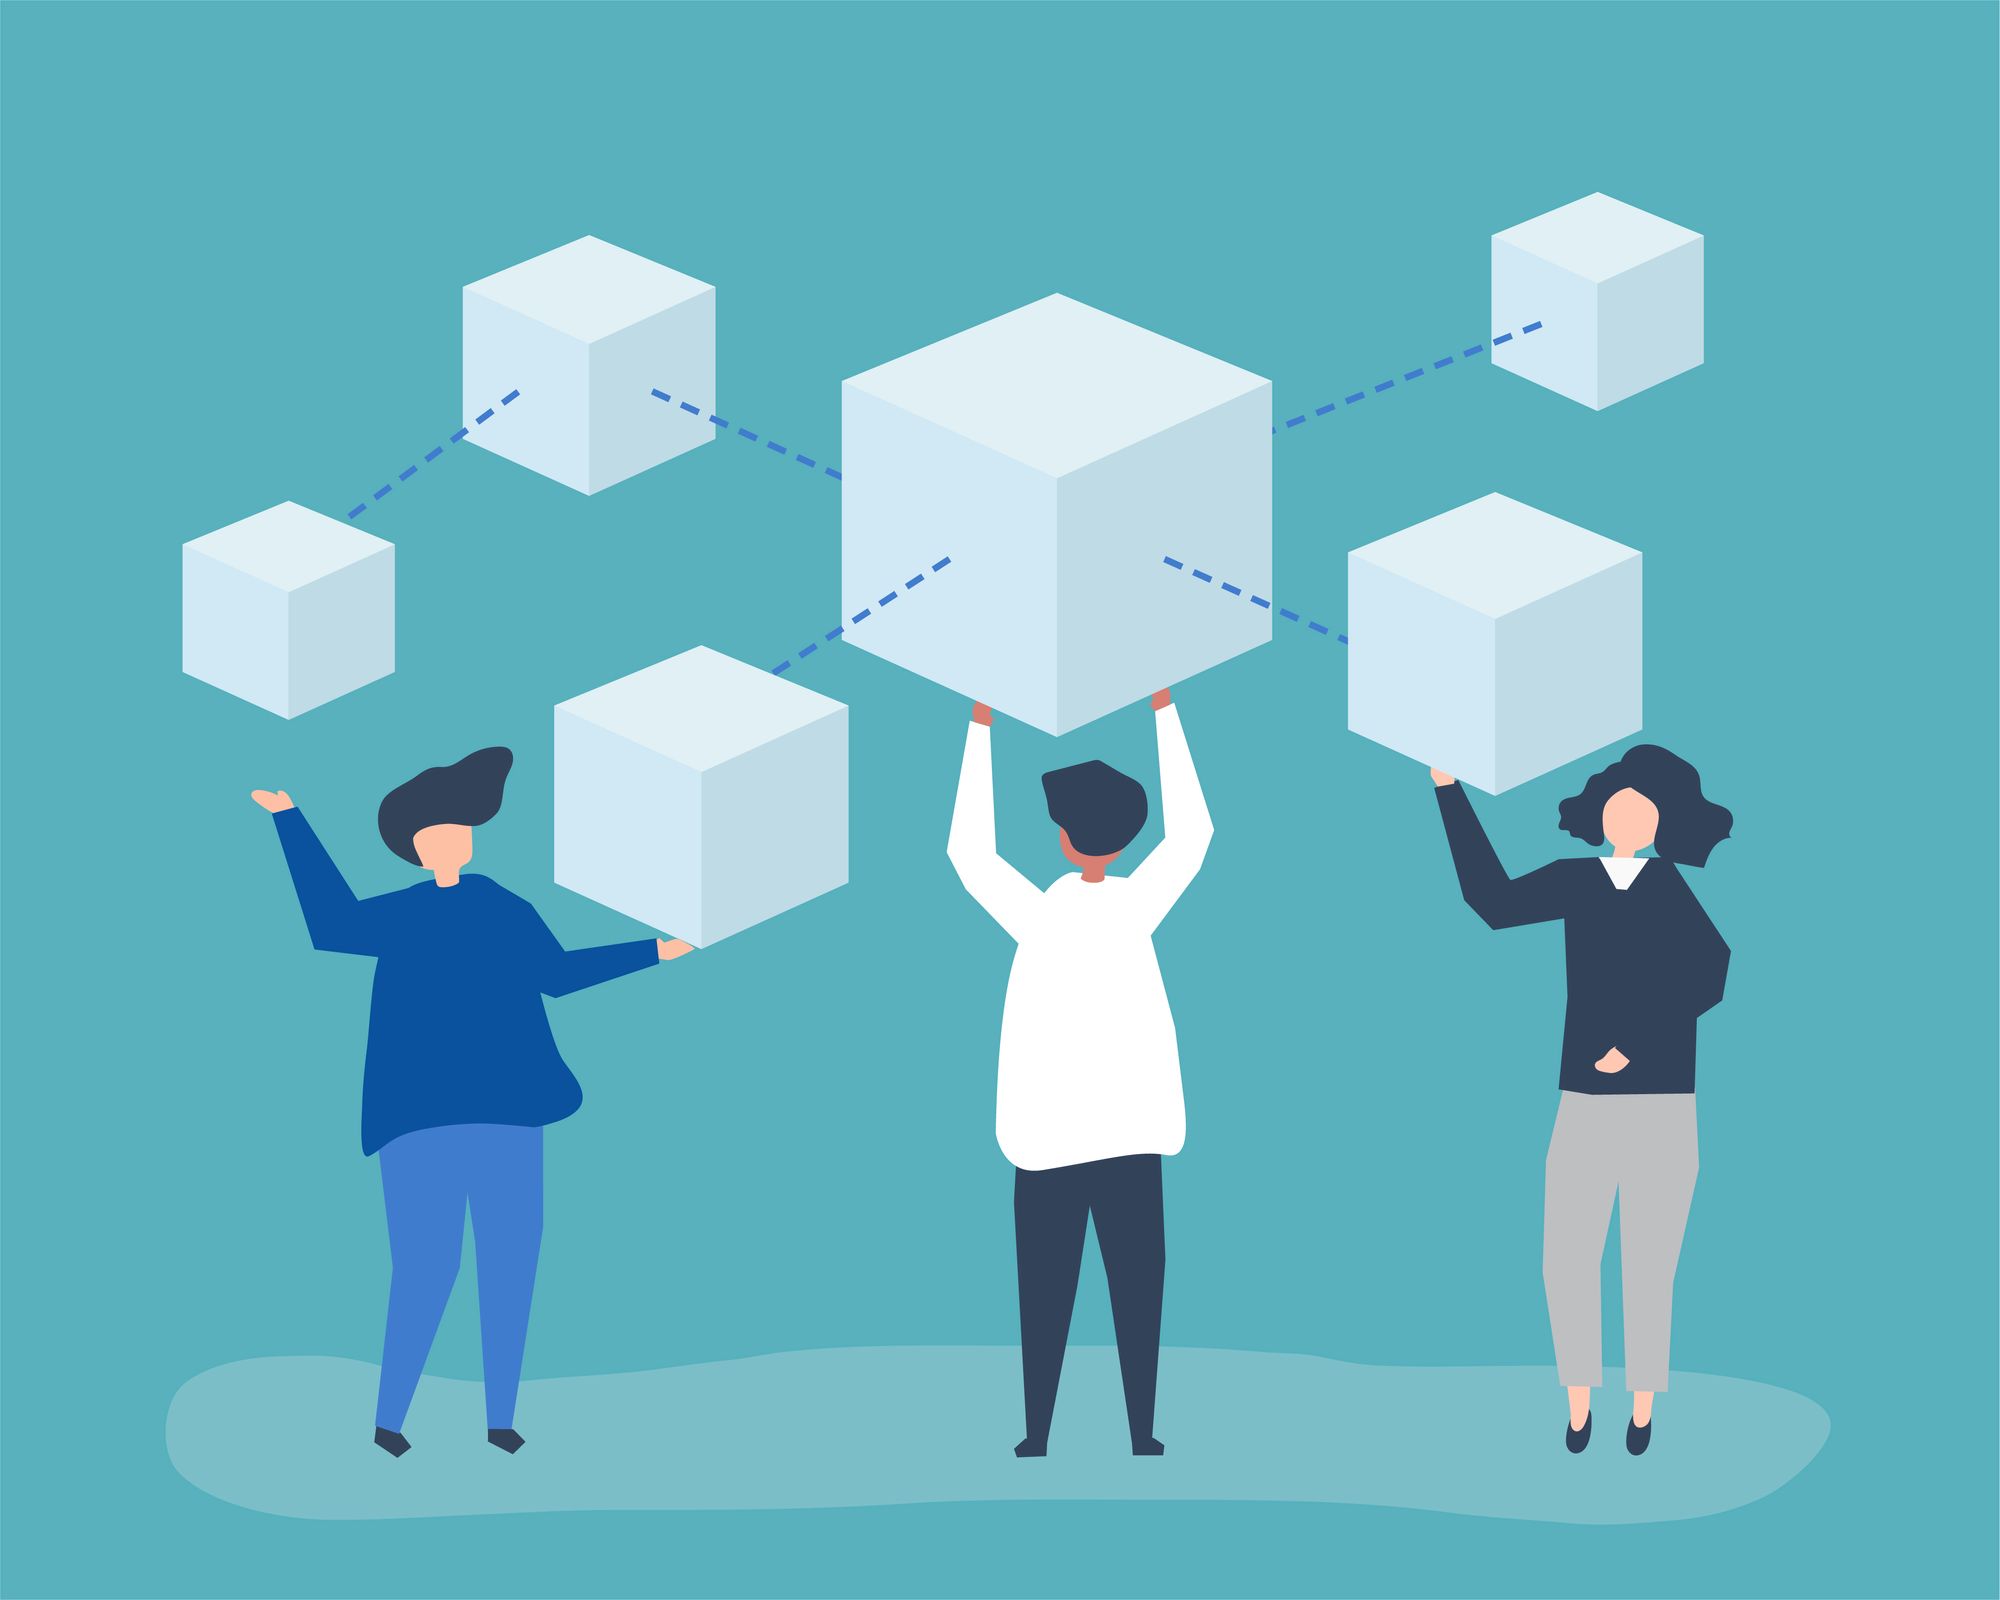 An infographic depicting 3 people holding up a network of blocks in the air.